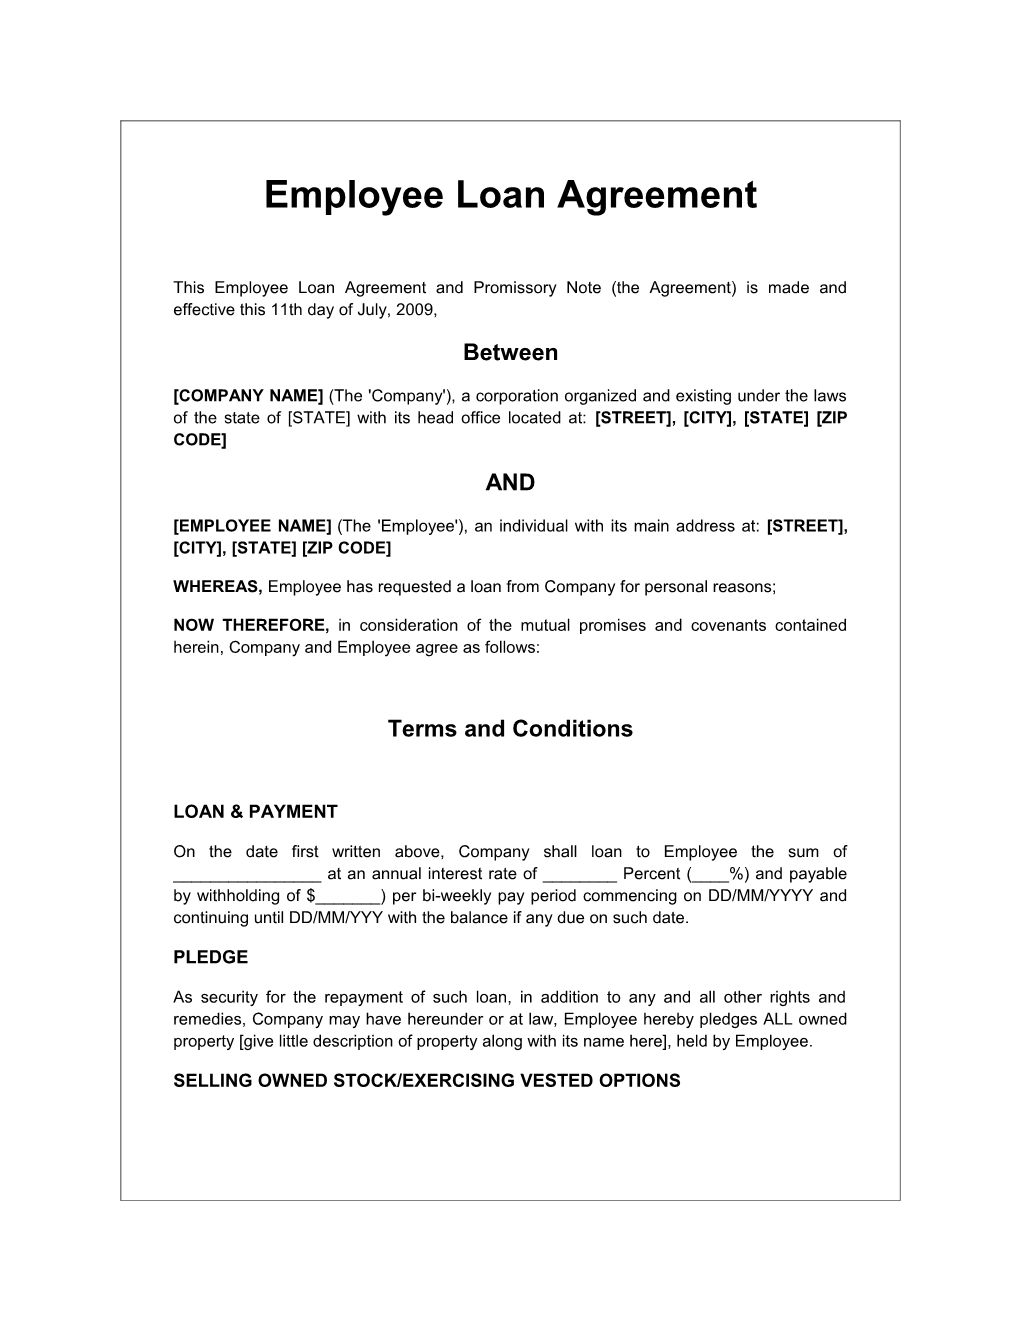 WHEREAS, Employee Has Requested a Loan from Company for Personal Reasons;